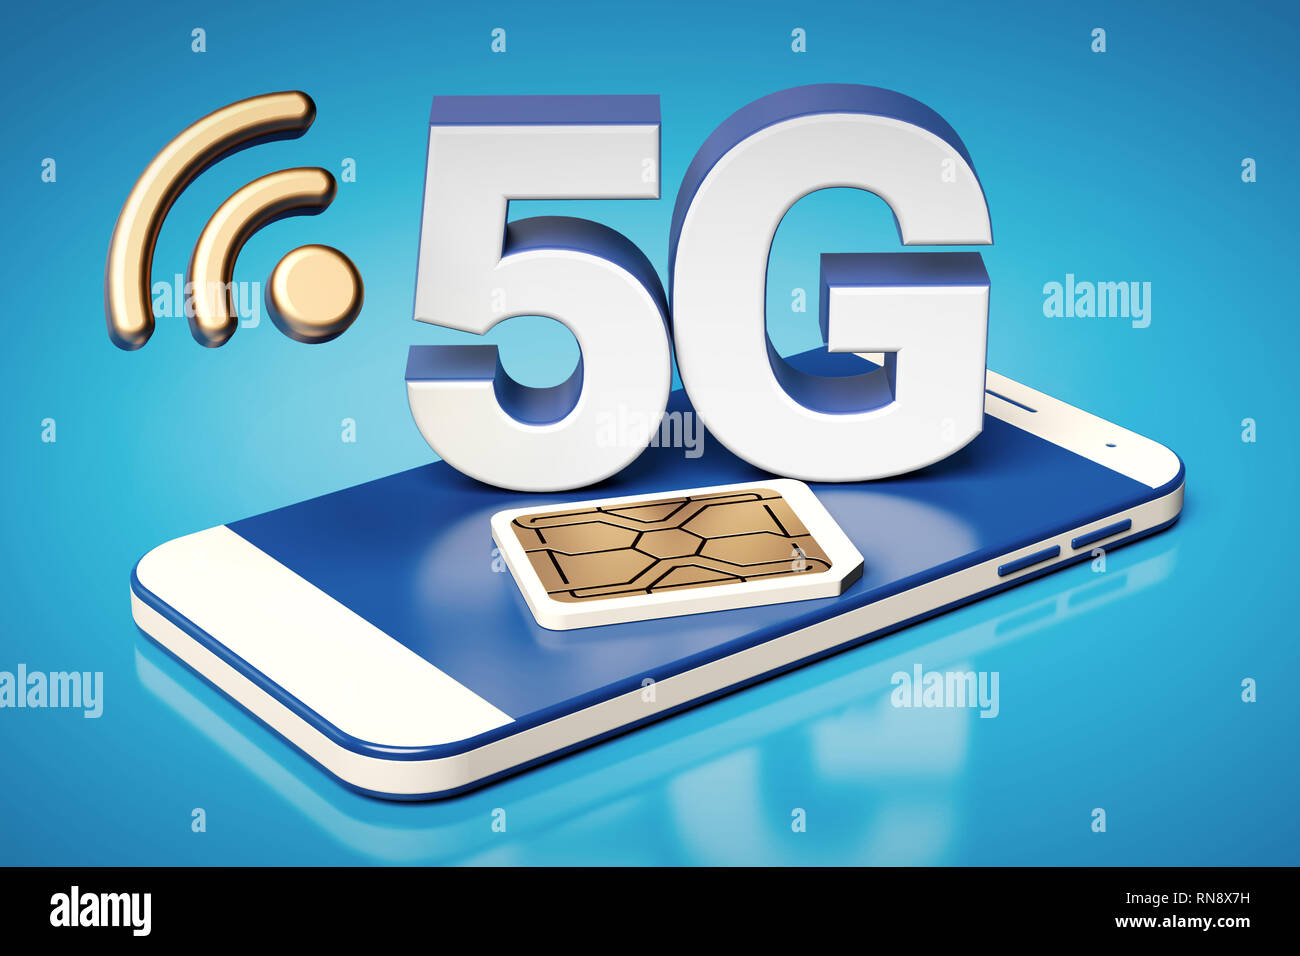 5G white letters standing on a simplified smartphone with sim card next to it. Blue background with copyspace. 3D rendering Stock Photo